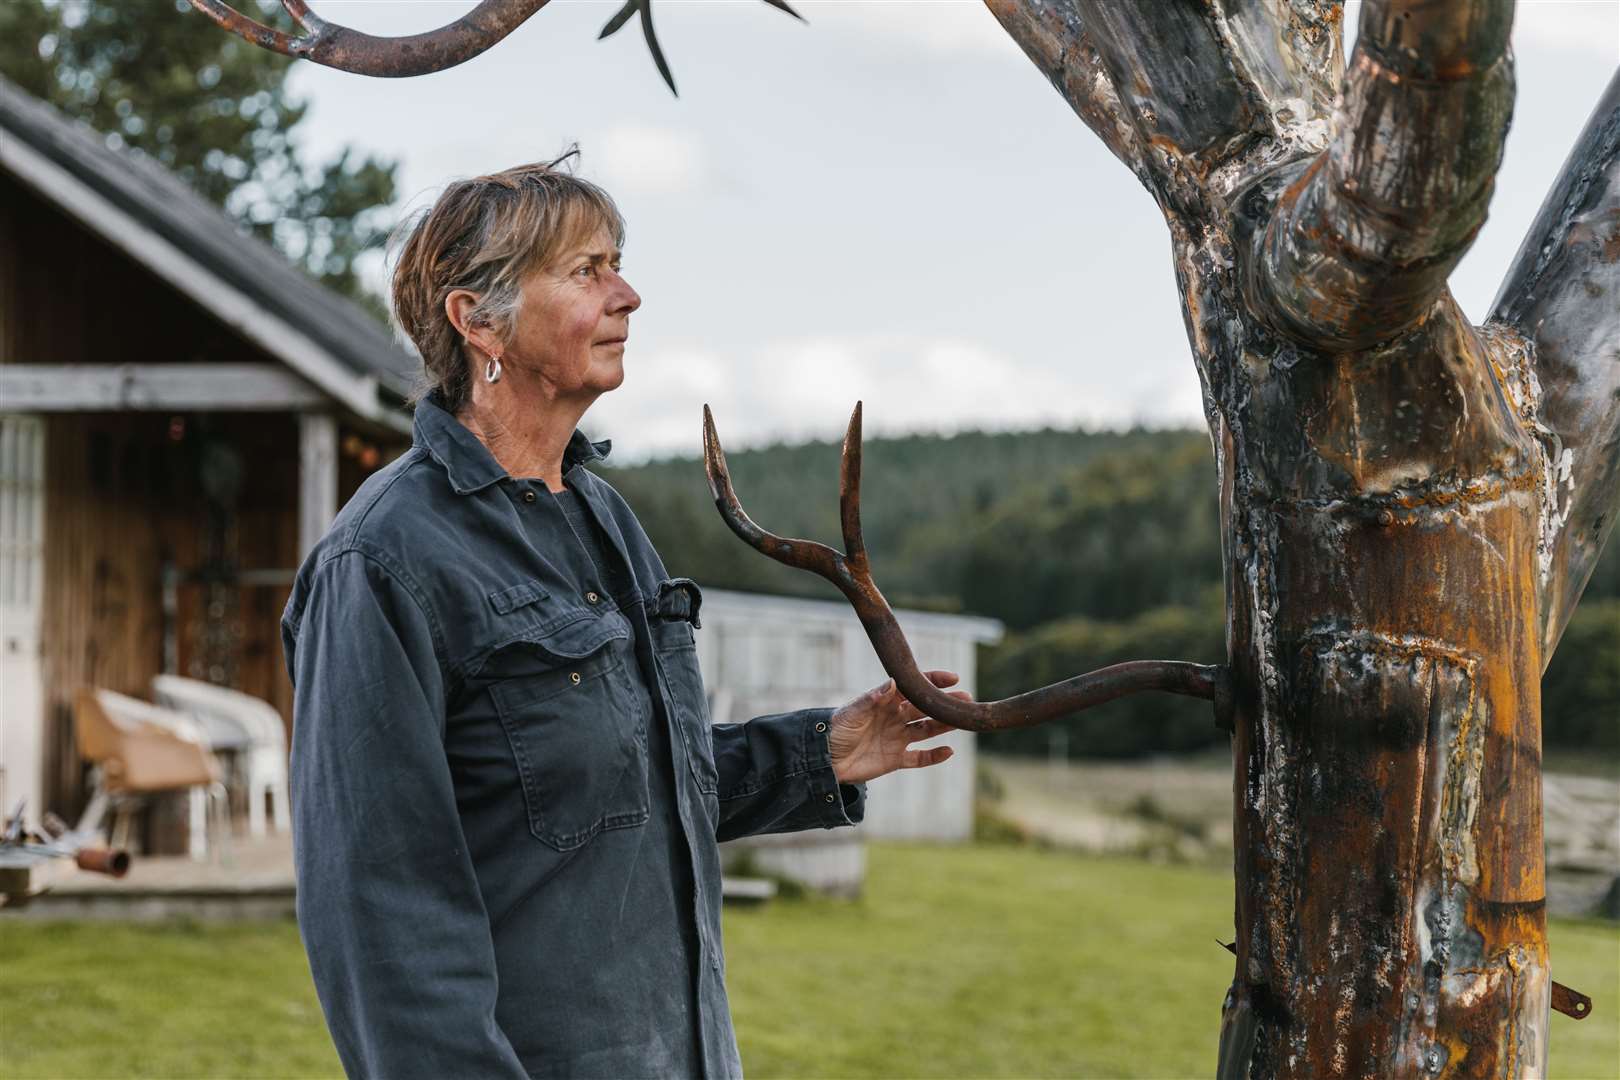 Sculptor Helen Denerley is creating a 'Gathering Tree' sculpture for Trees for Life's Dundreggan Rewilding Centre, near Loch Ness. Picture: Grant Anderson.